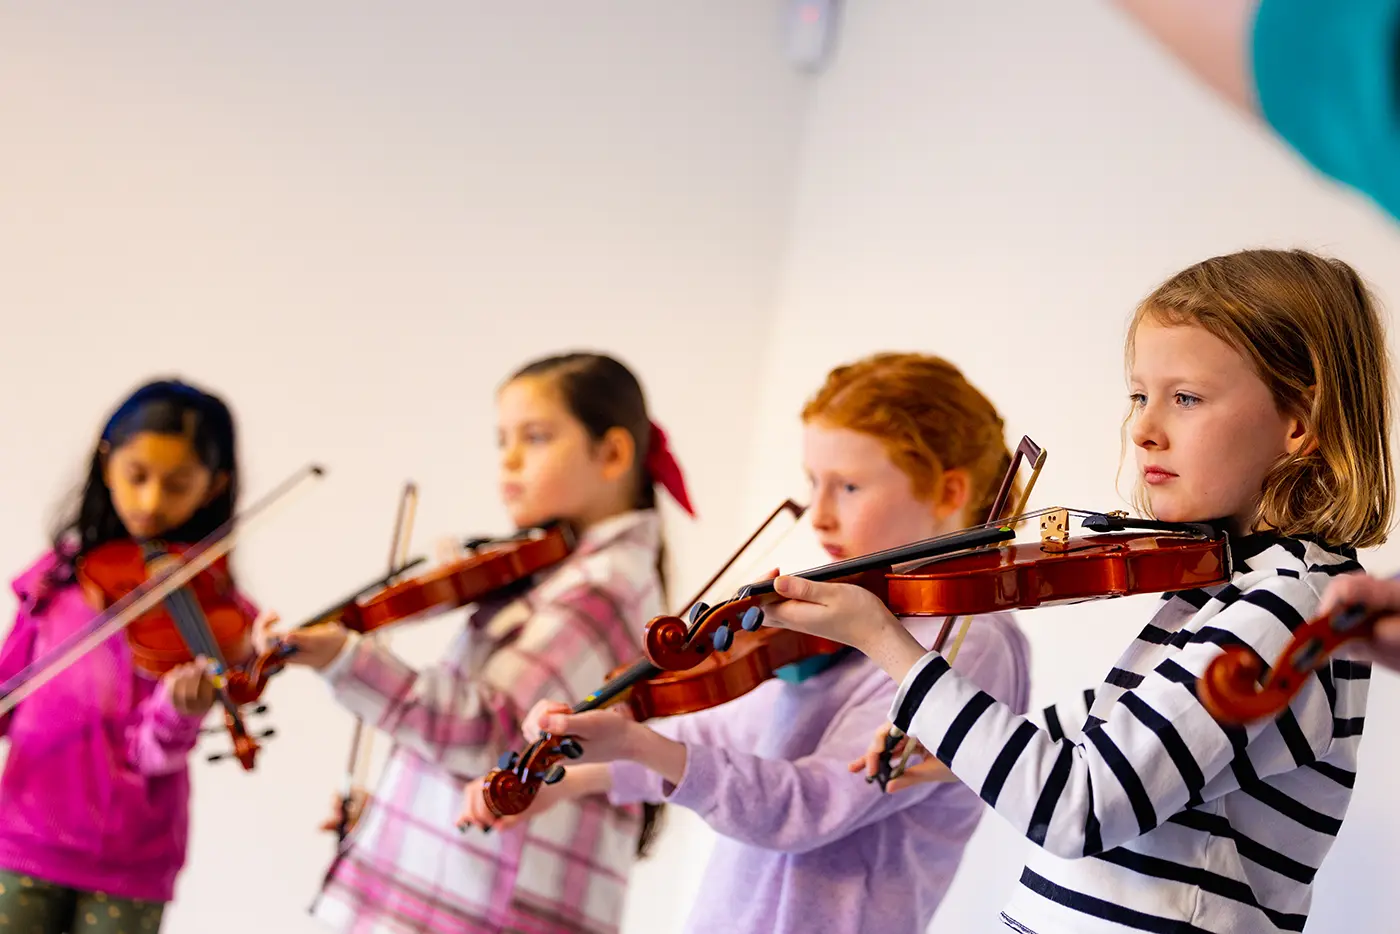 4 young girls learning to play the violin